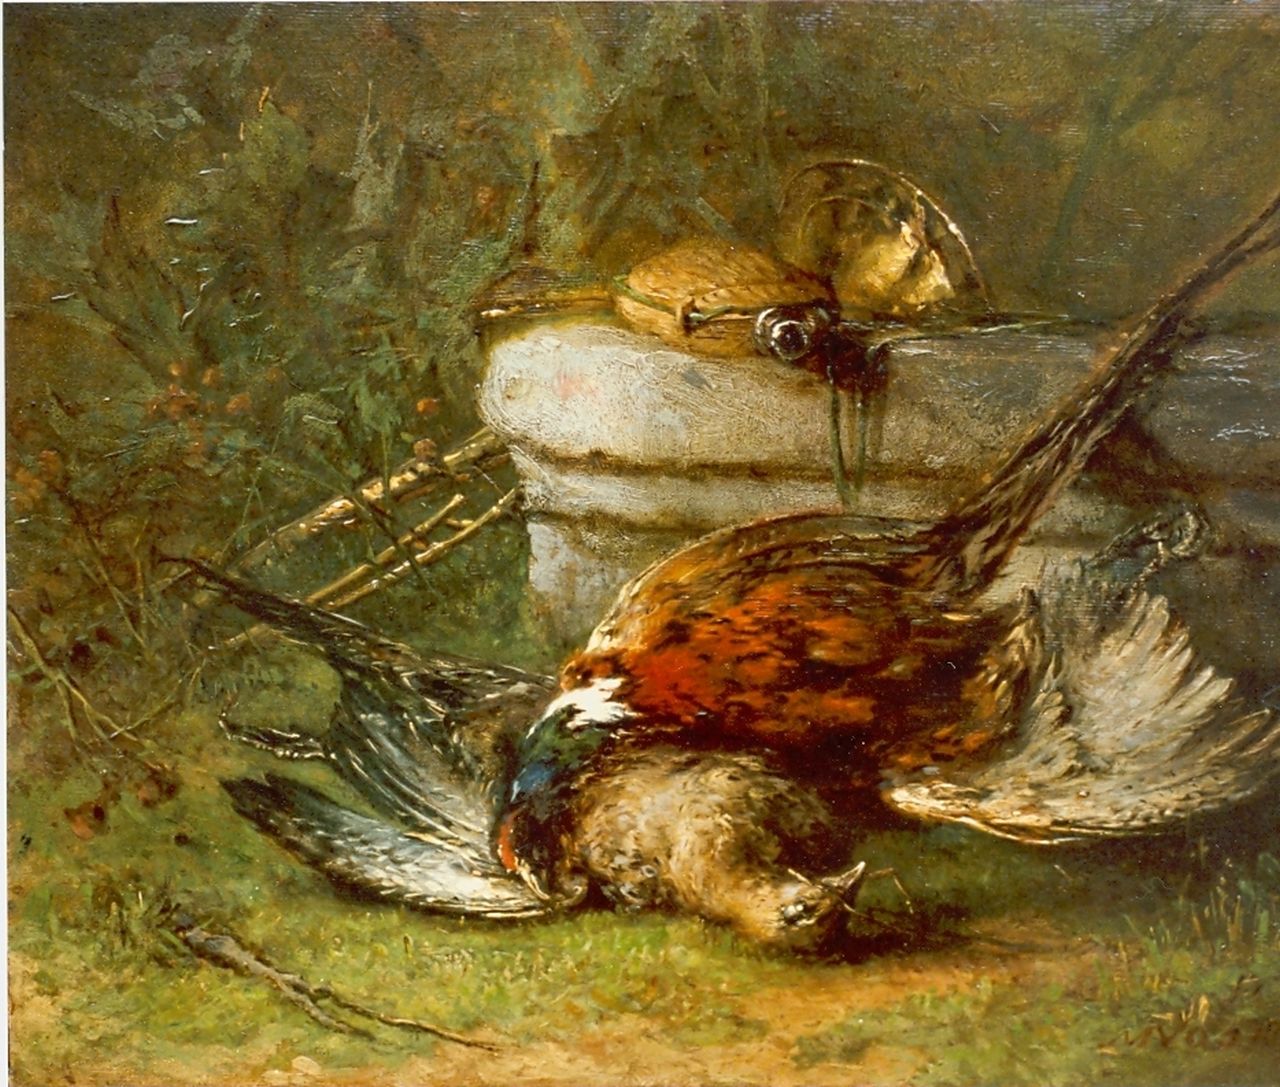 Vos M.  | Maria Vos, A hunting still life with pheasants, Öl auf Holz 25,3 x 31,0 cm, signed l.r. und dated 1892